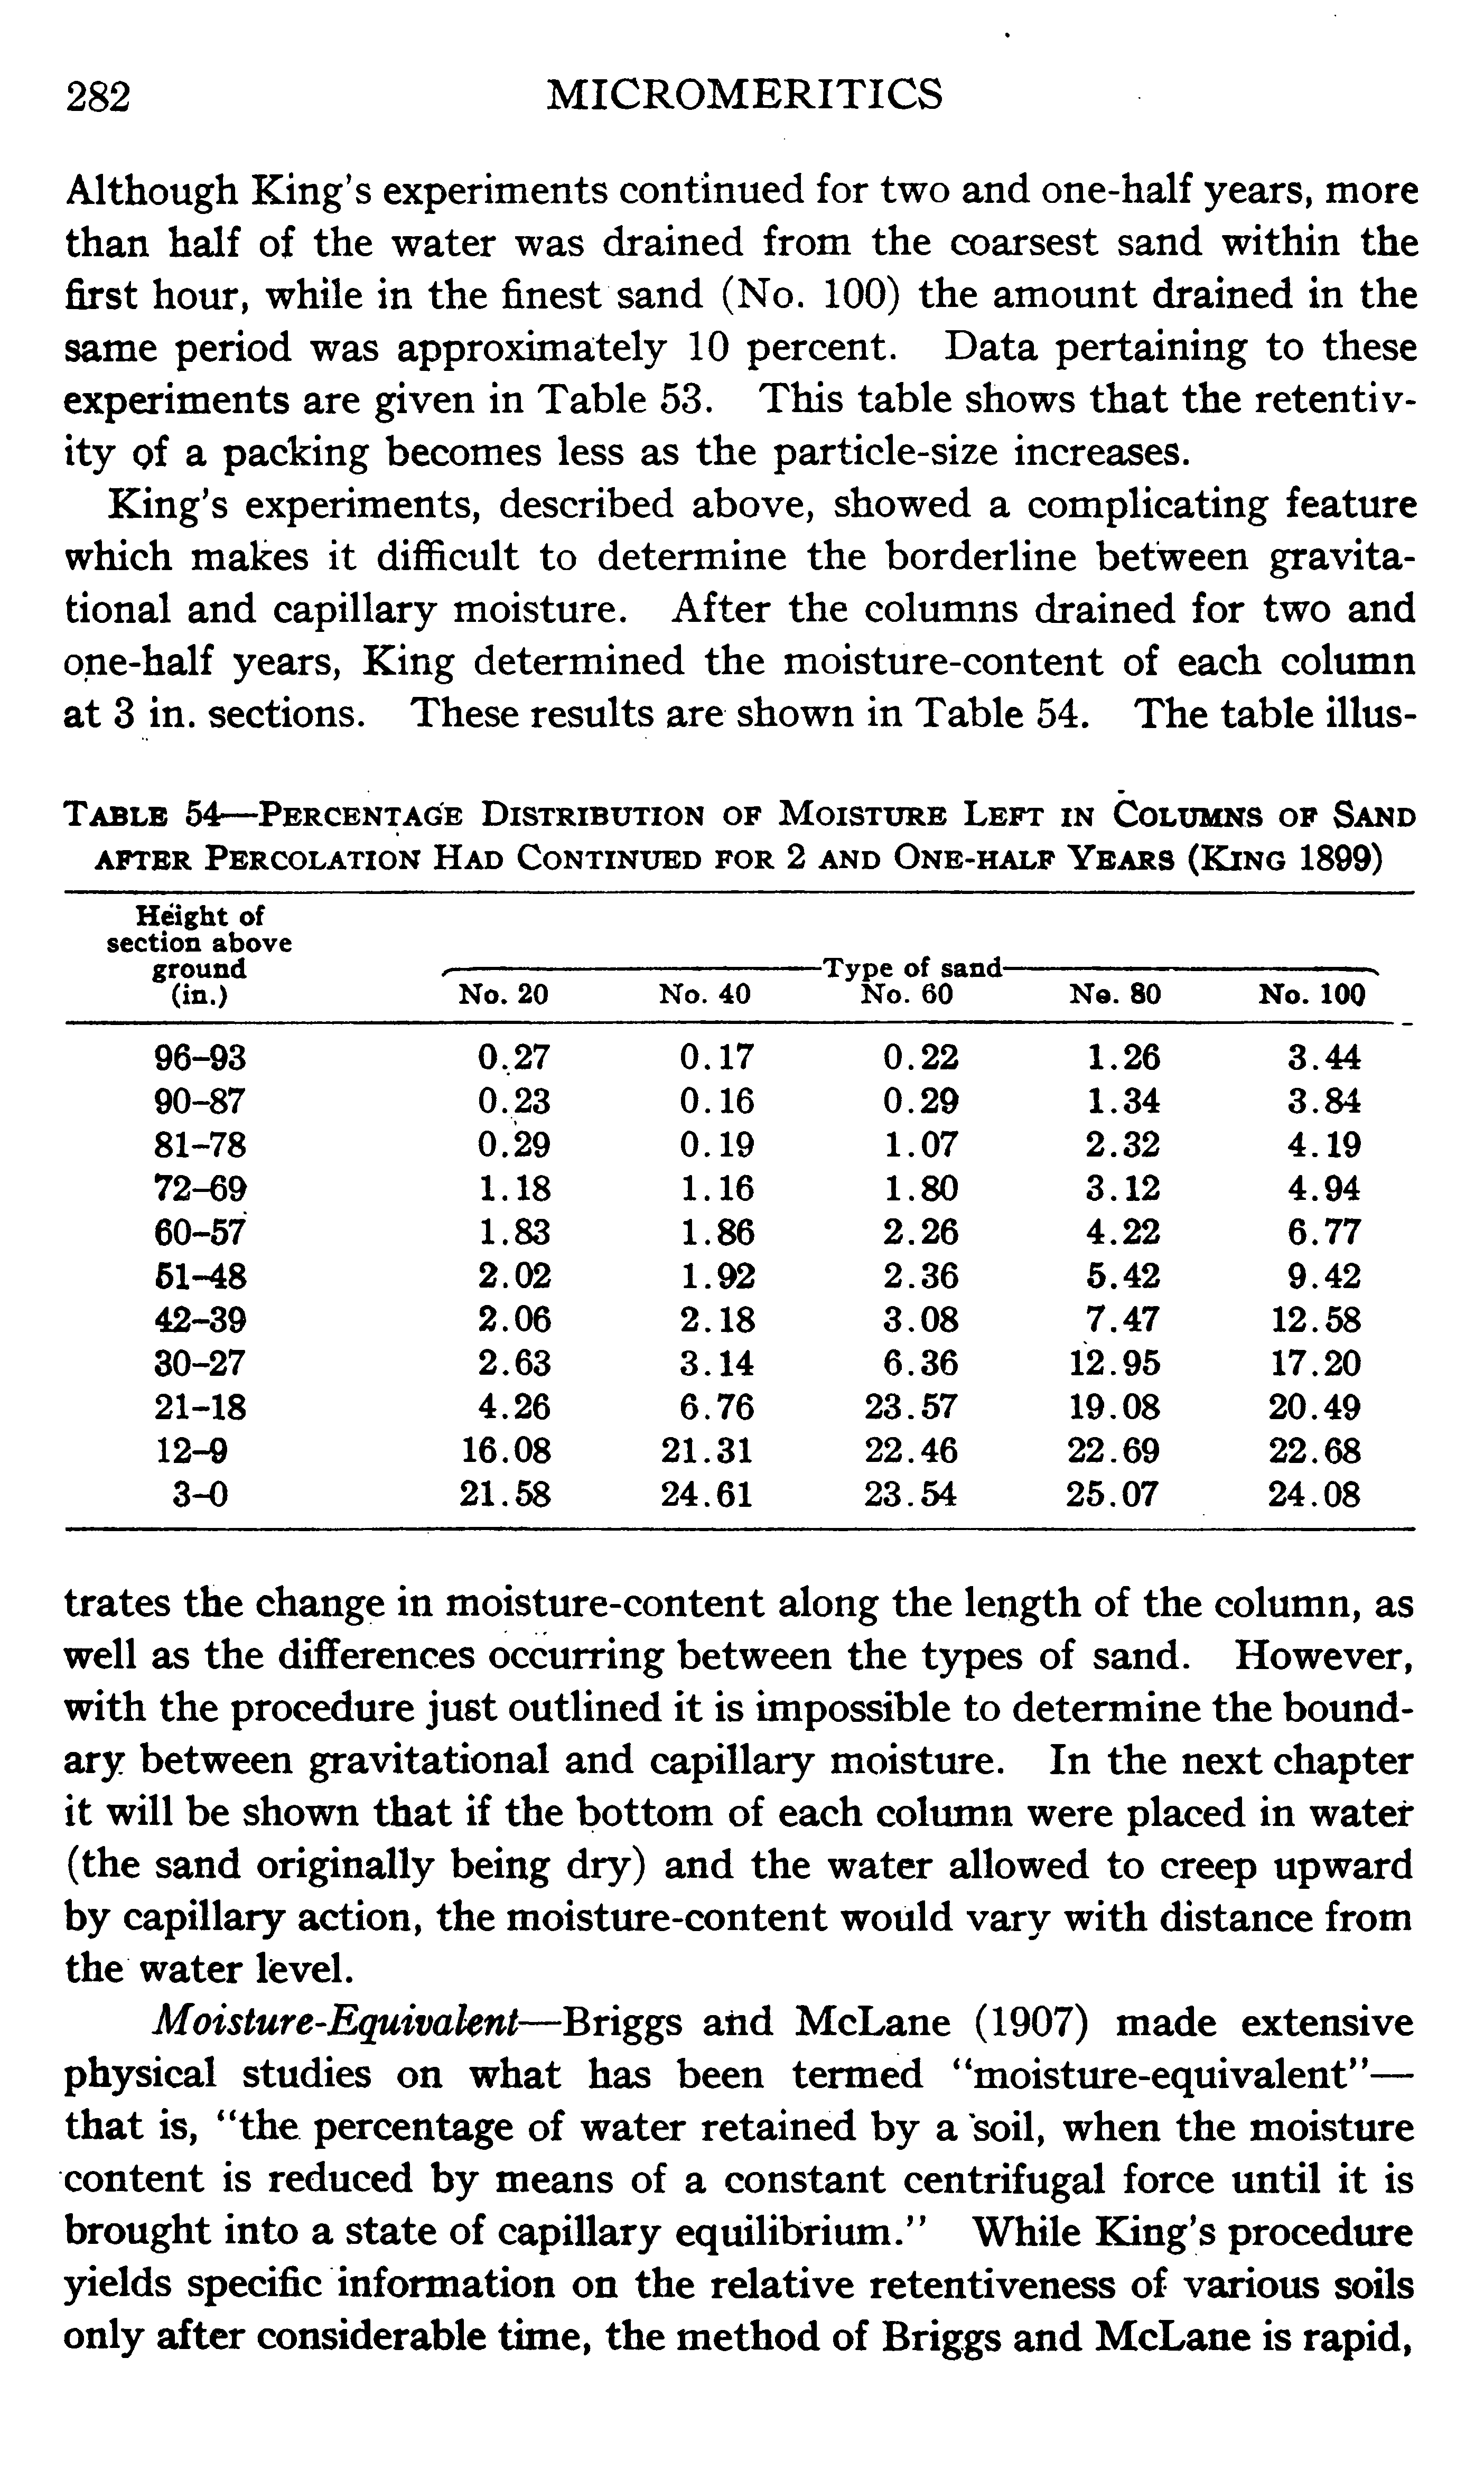 Table 54—Percentage Distribution of Moisture Left in Columns of Sand after Percolation Had Continued for 2 and One-half Years (King 1899)...